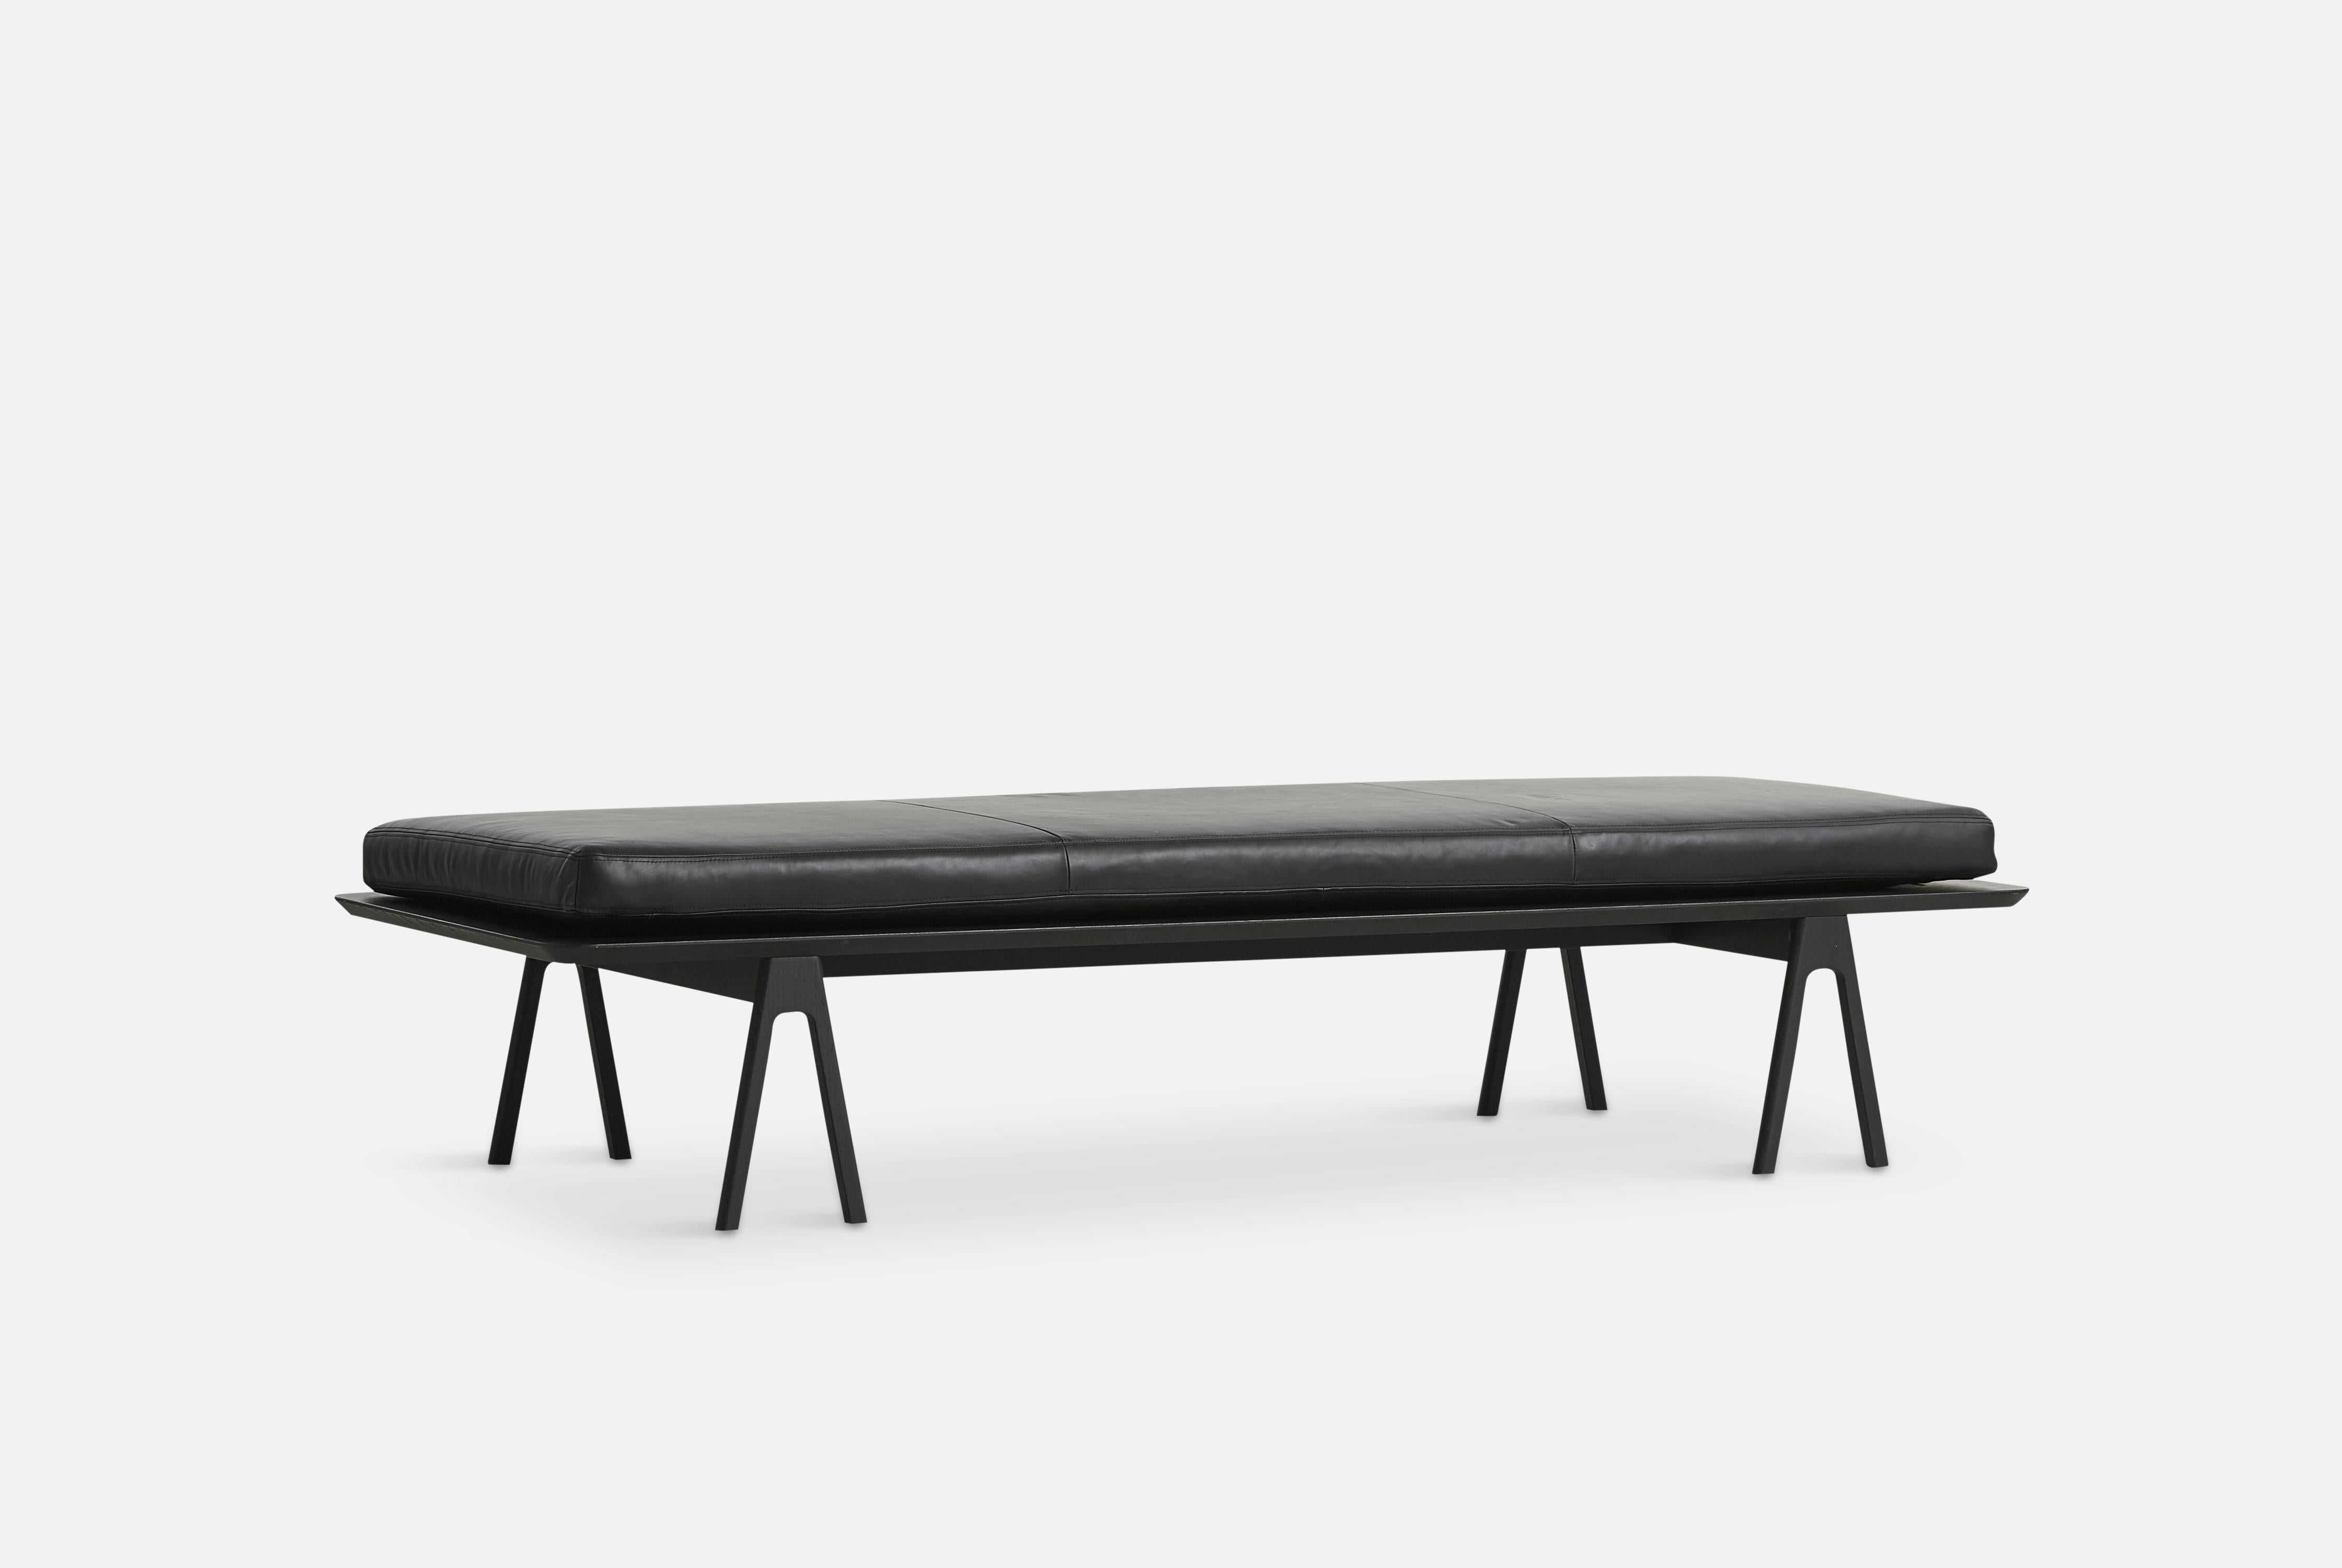 Black leather level daybed by Msds Studio
Materials: Camo leather, foam, oak.
Dimensions: D 76.5 x W 190 x H 41 cm
Also available in different materials. 

The founders, Mia and Torben Koed, decided to put their 30 years of experience into a